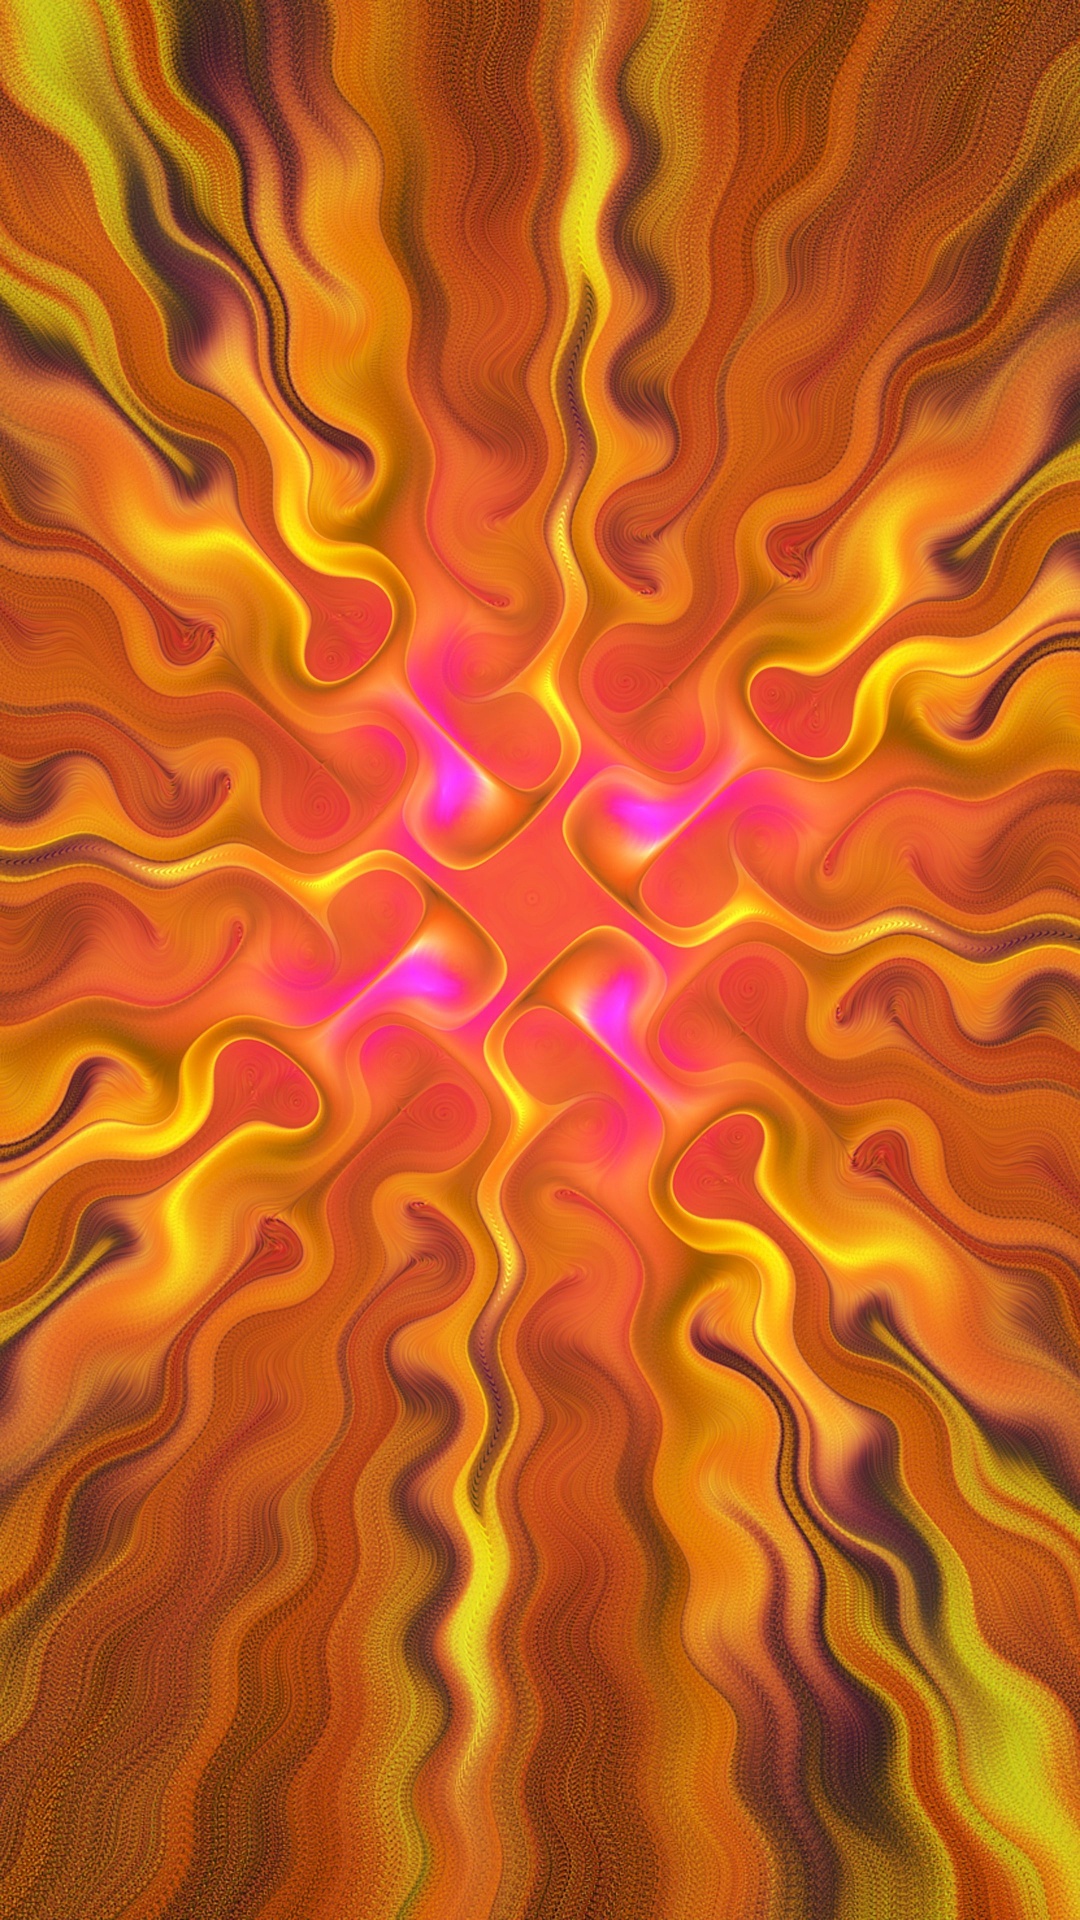 Orange and Yellow Abstract Painting. Wallpaper in 1080x1920 Resolution